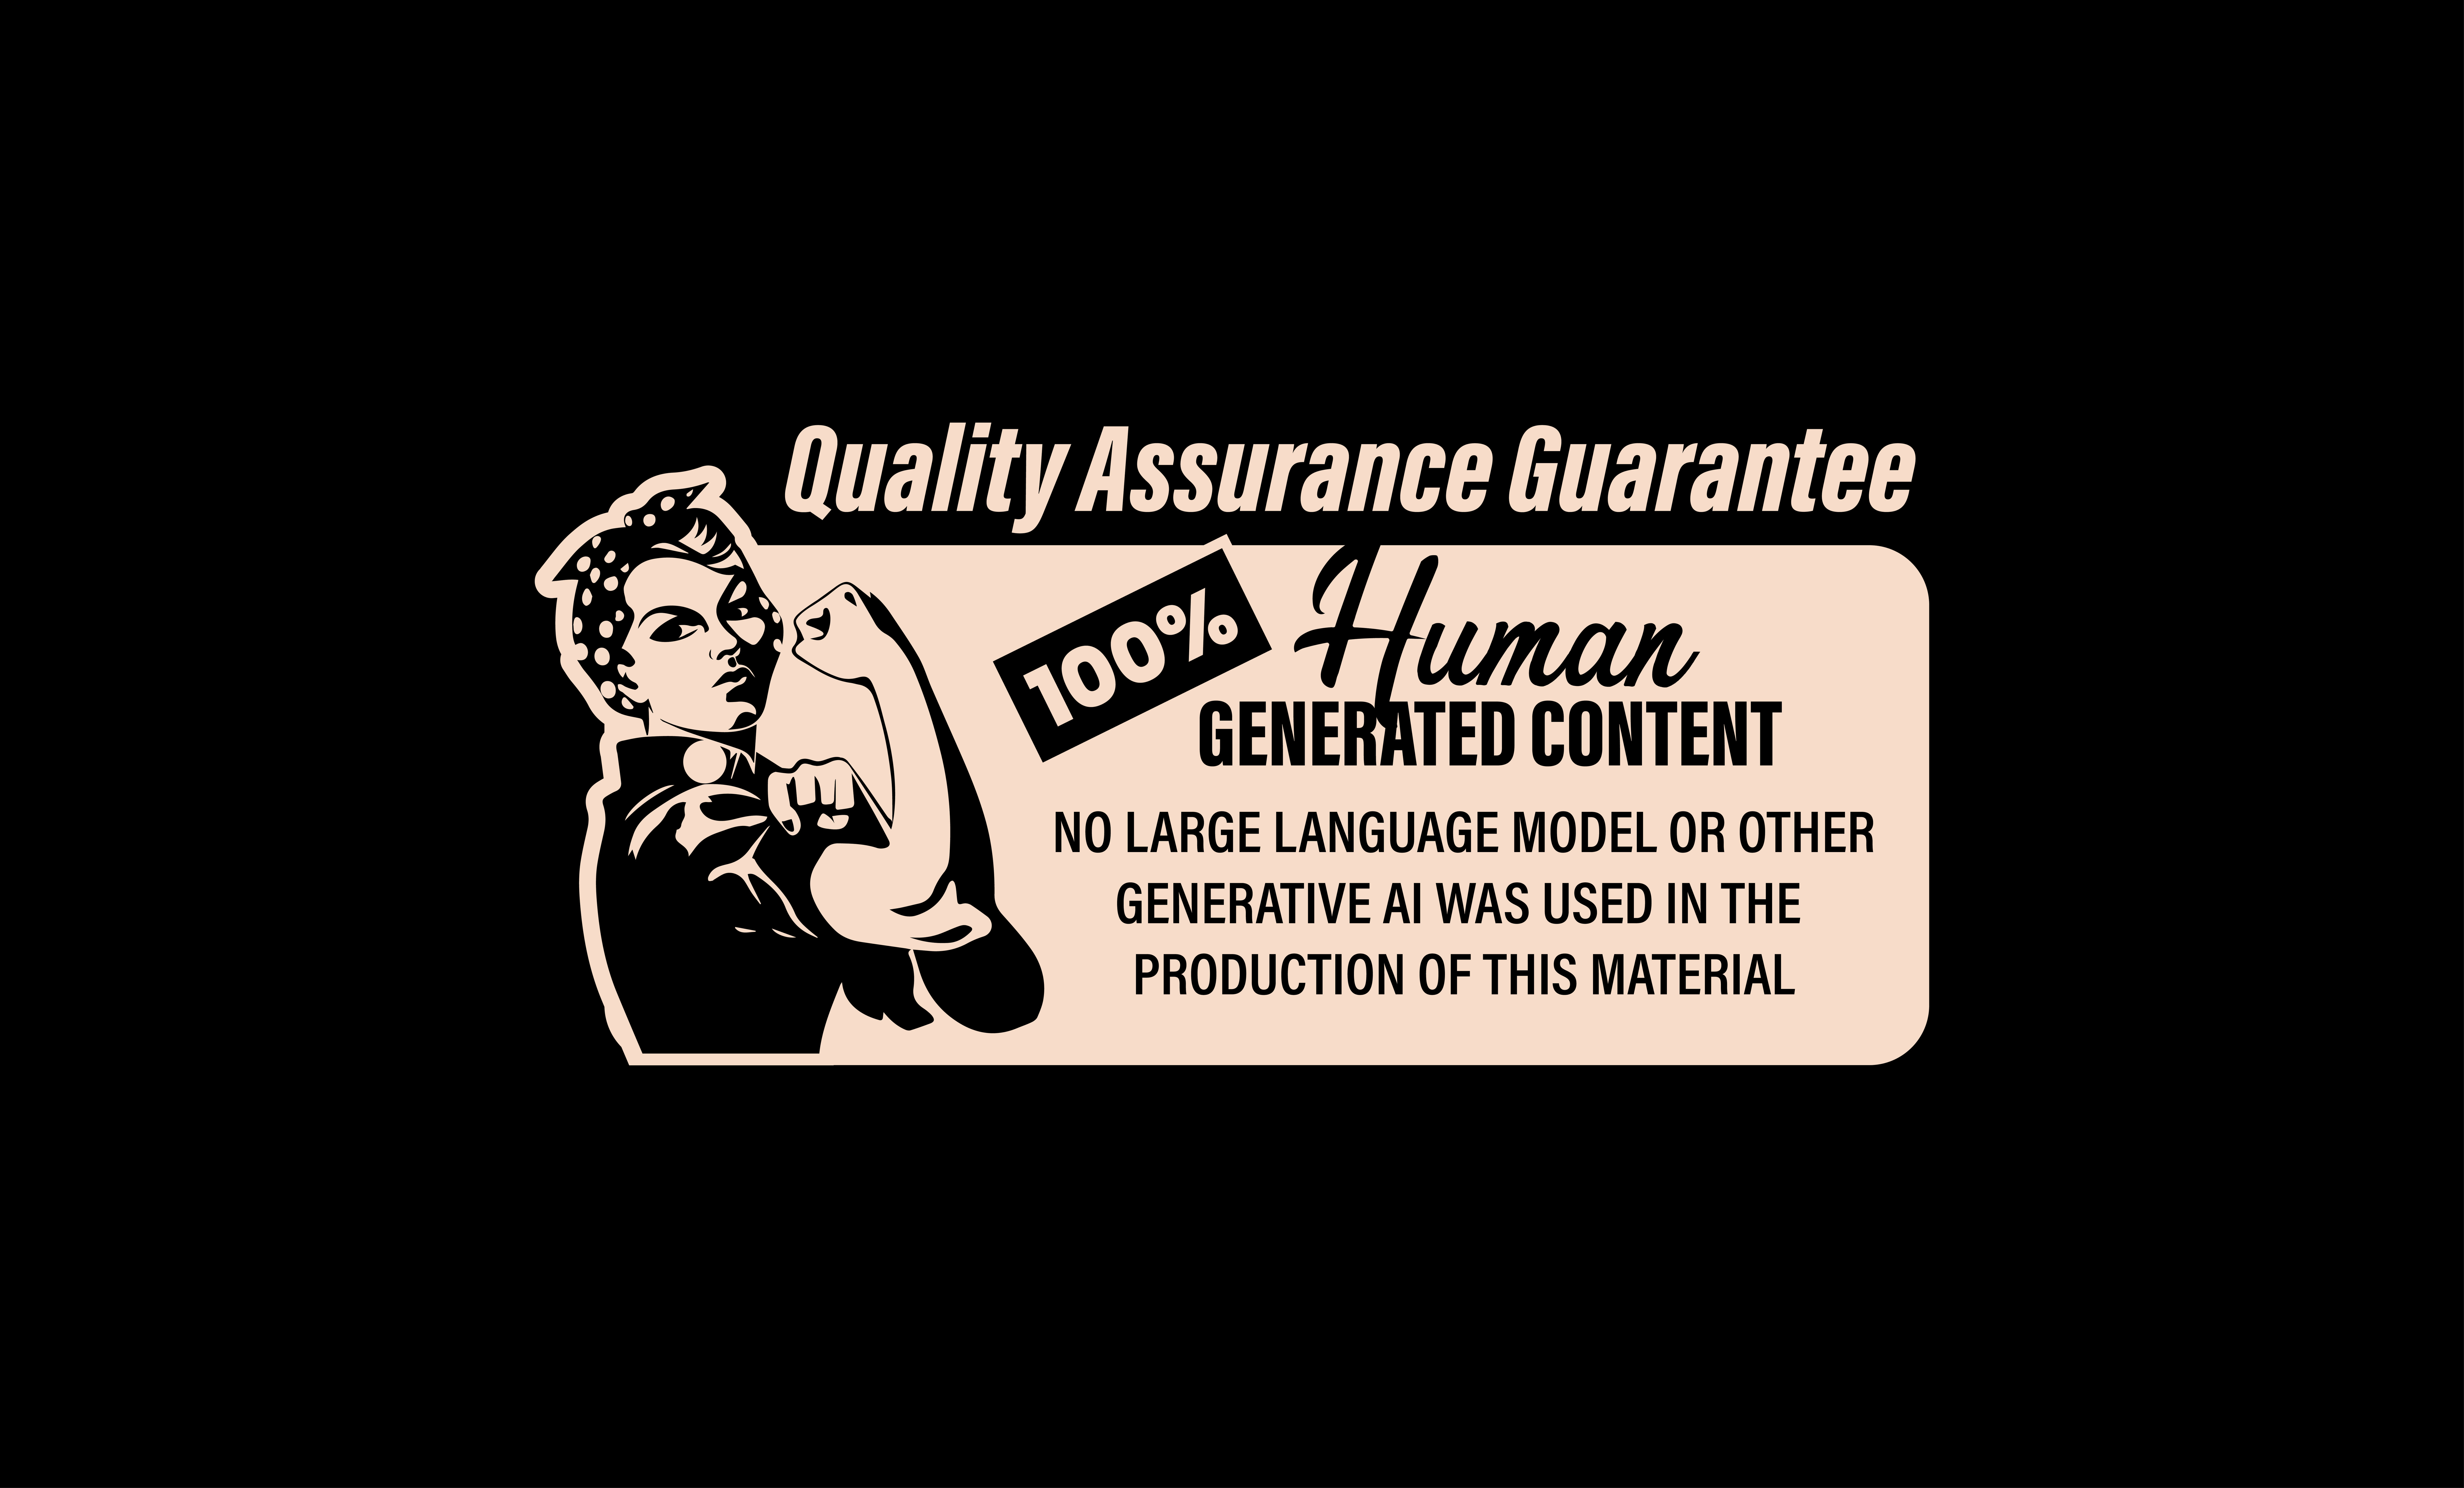 The 100% Human Generated Content Quality Assurance Guarantee